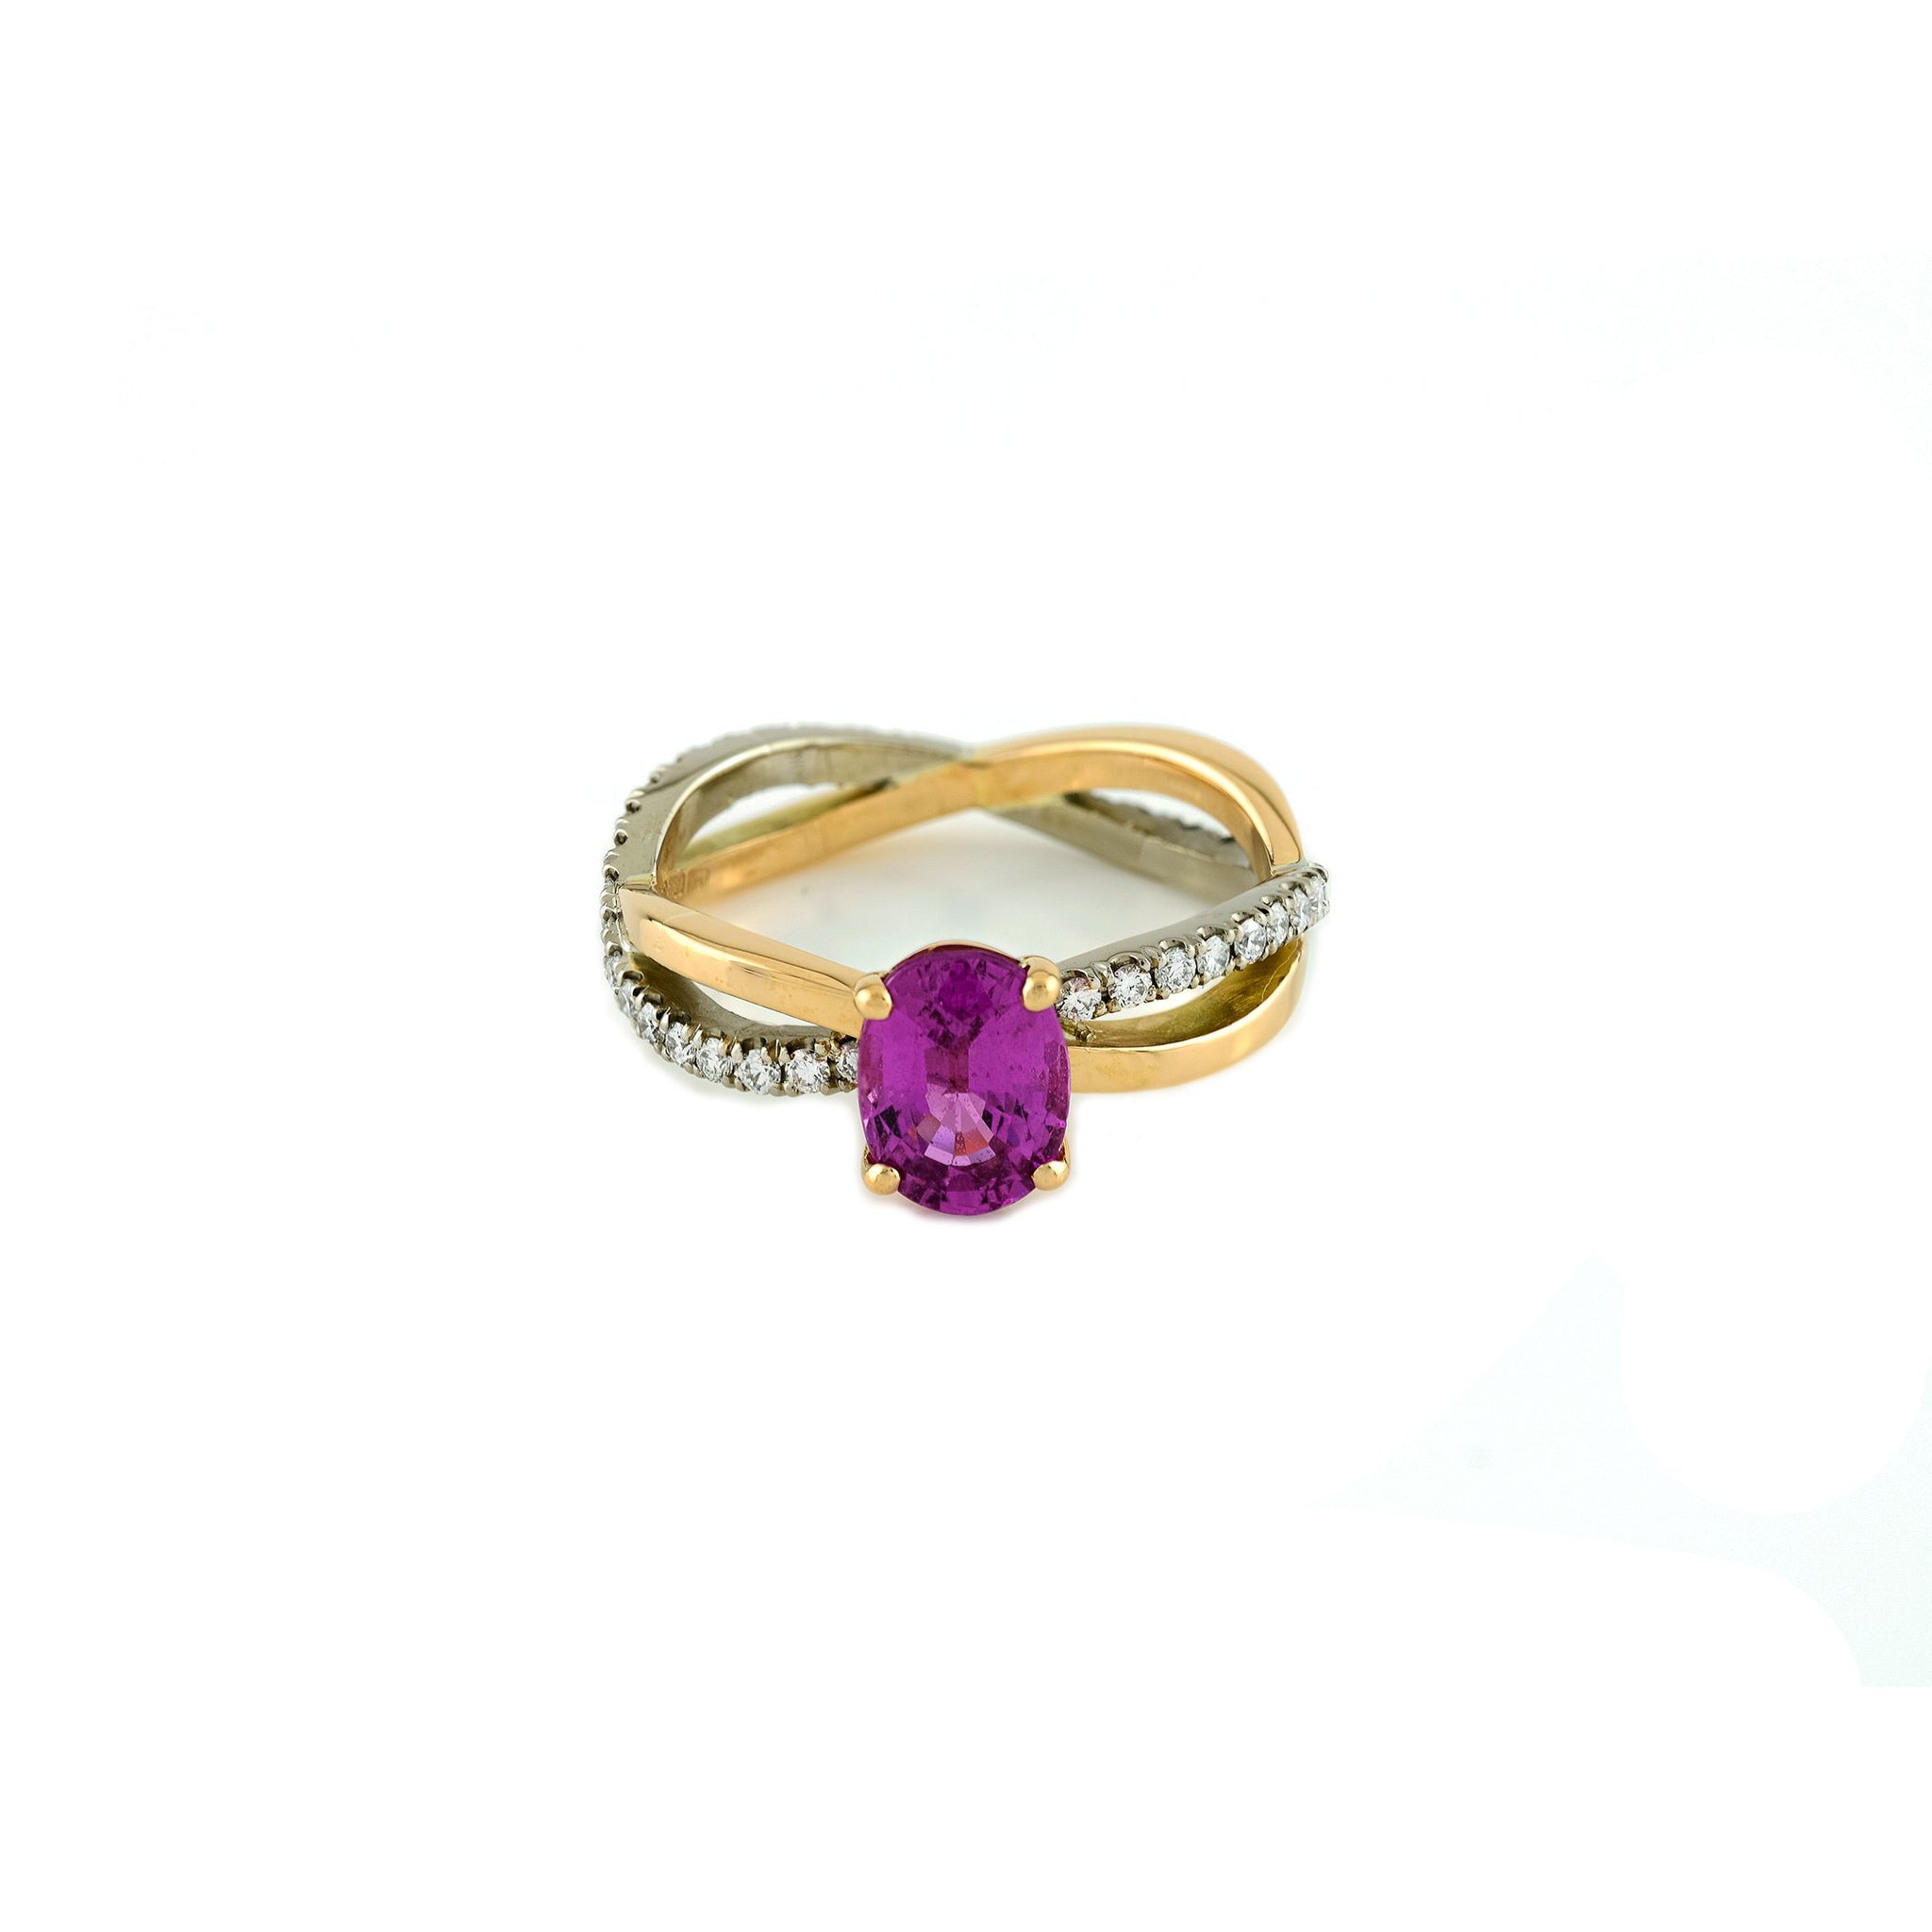 18ct White and Rose Gold 1.30ct Pink Sapphire and Diamond Ring